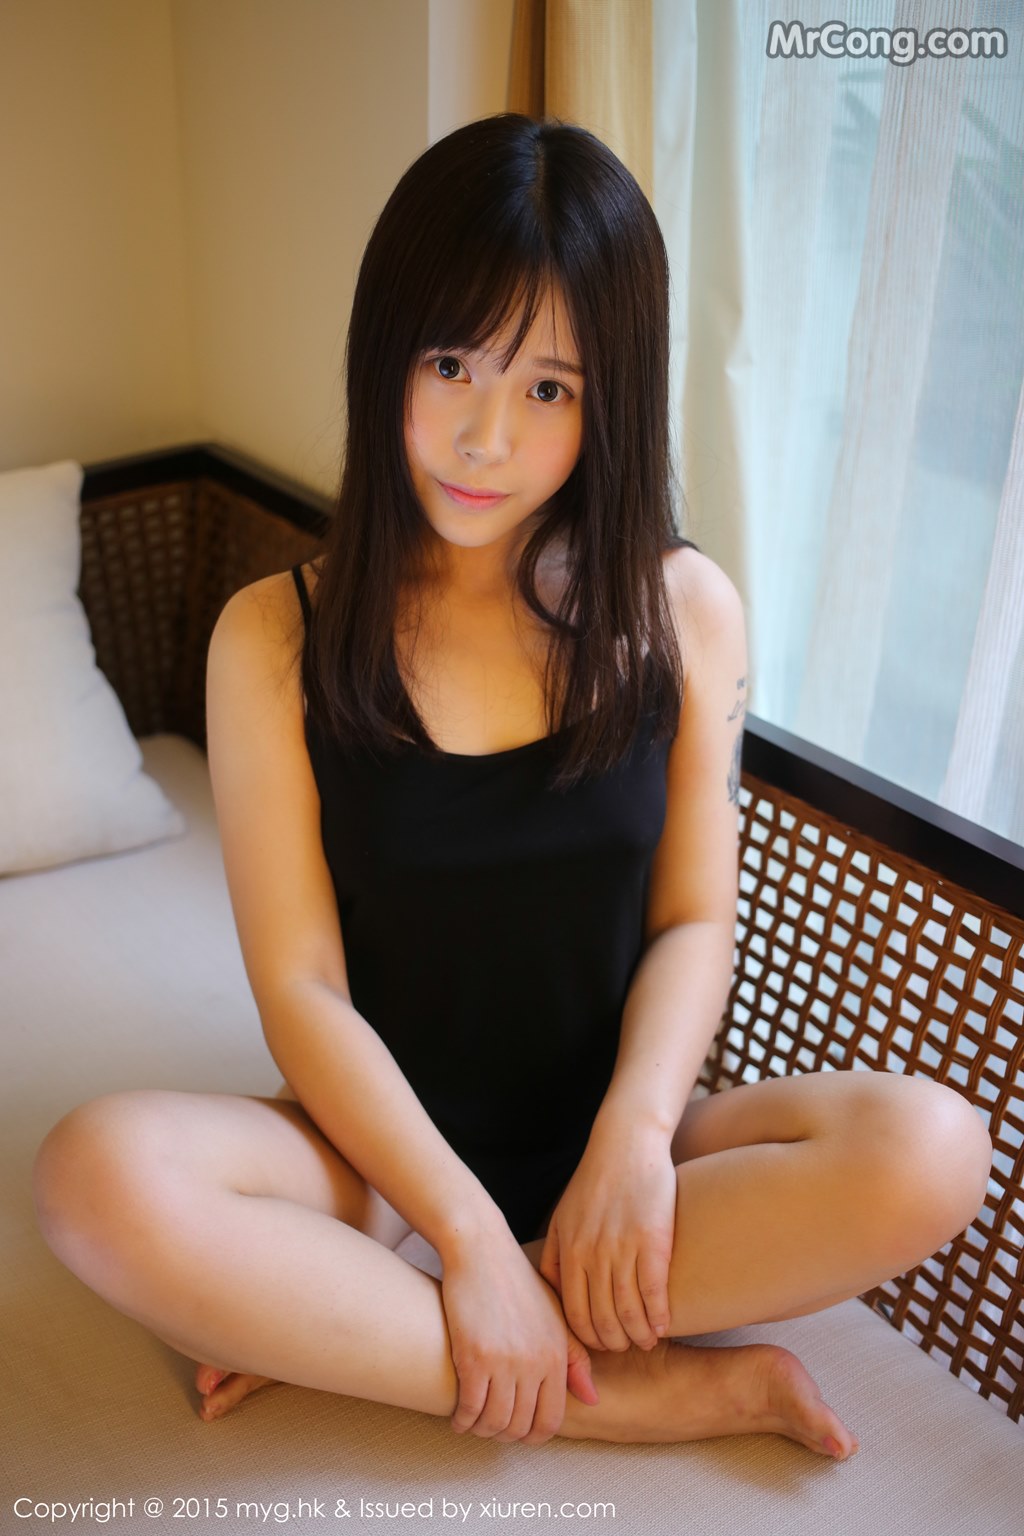 MyGirl Vol.173: Model Evelyn (艾莉) (94 pictures) photo 2-8